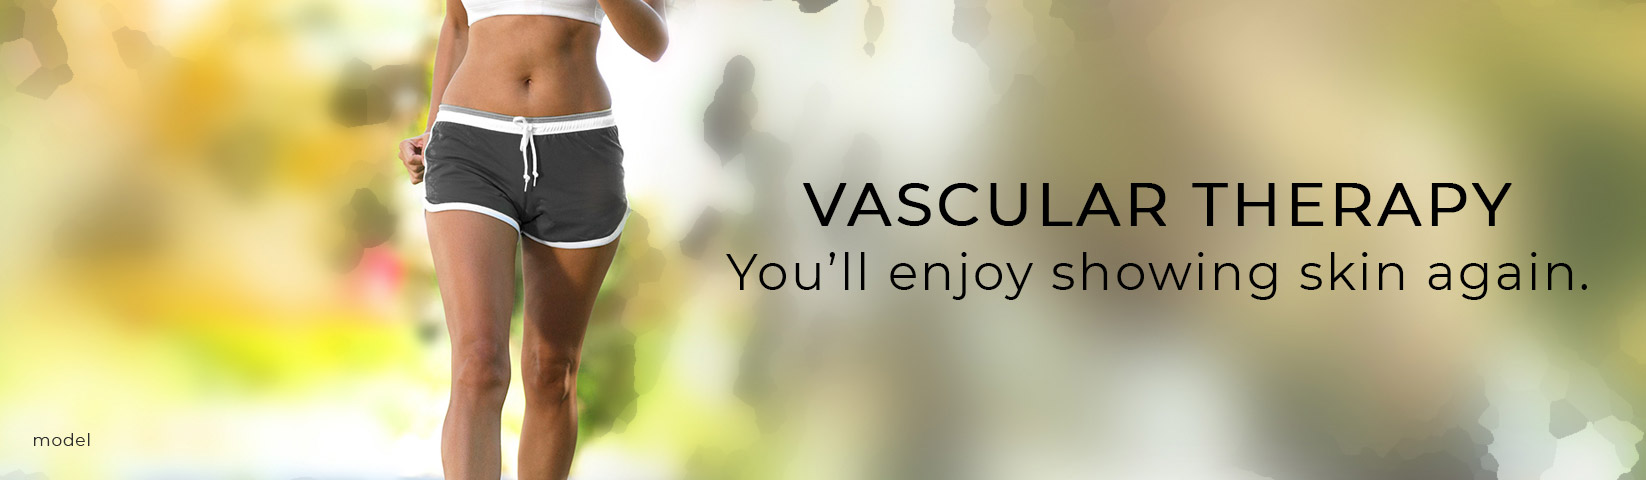 Vascular Therapy: You'll enjoy showing skin again